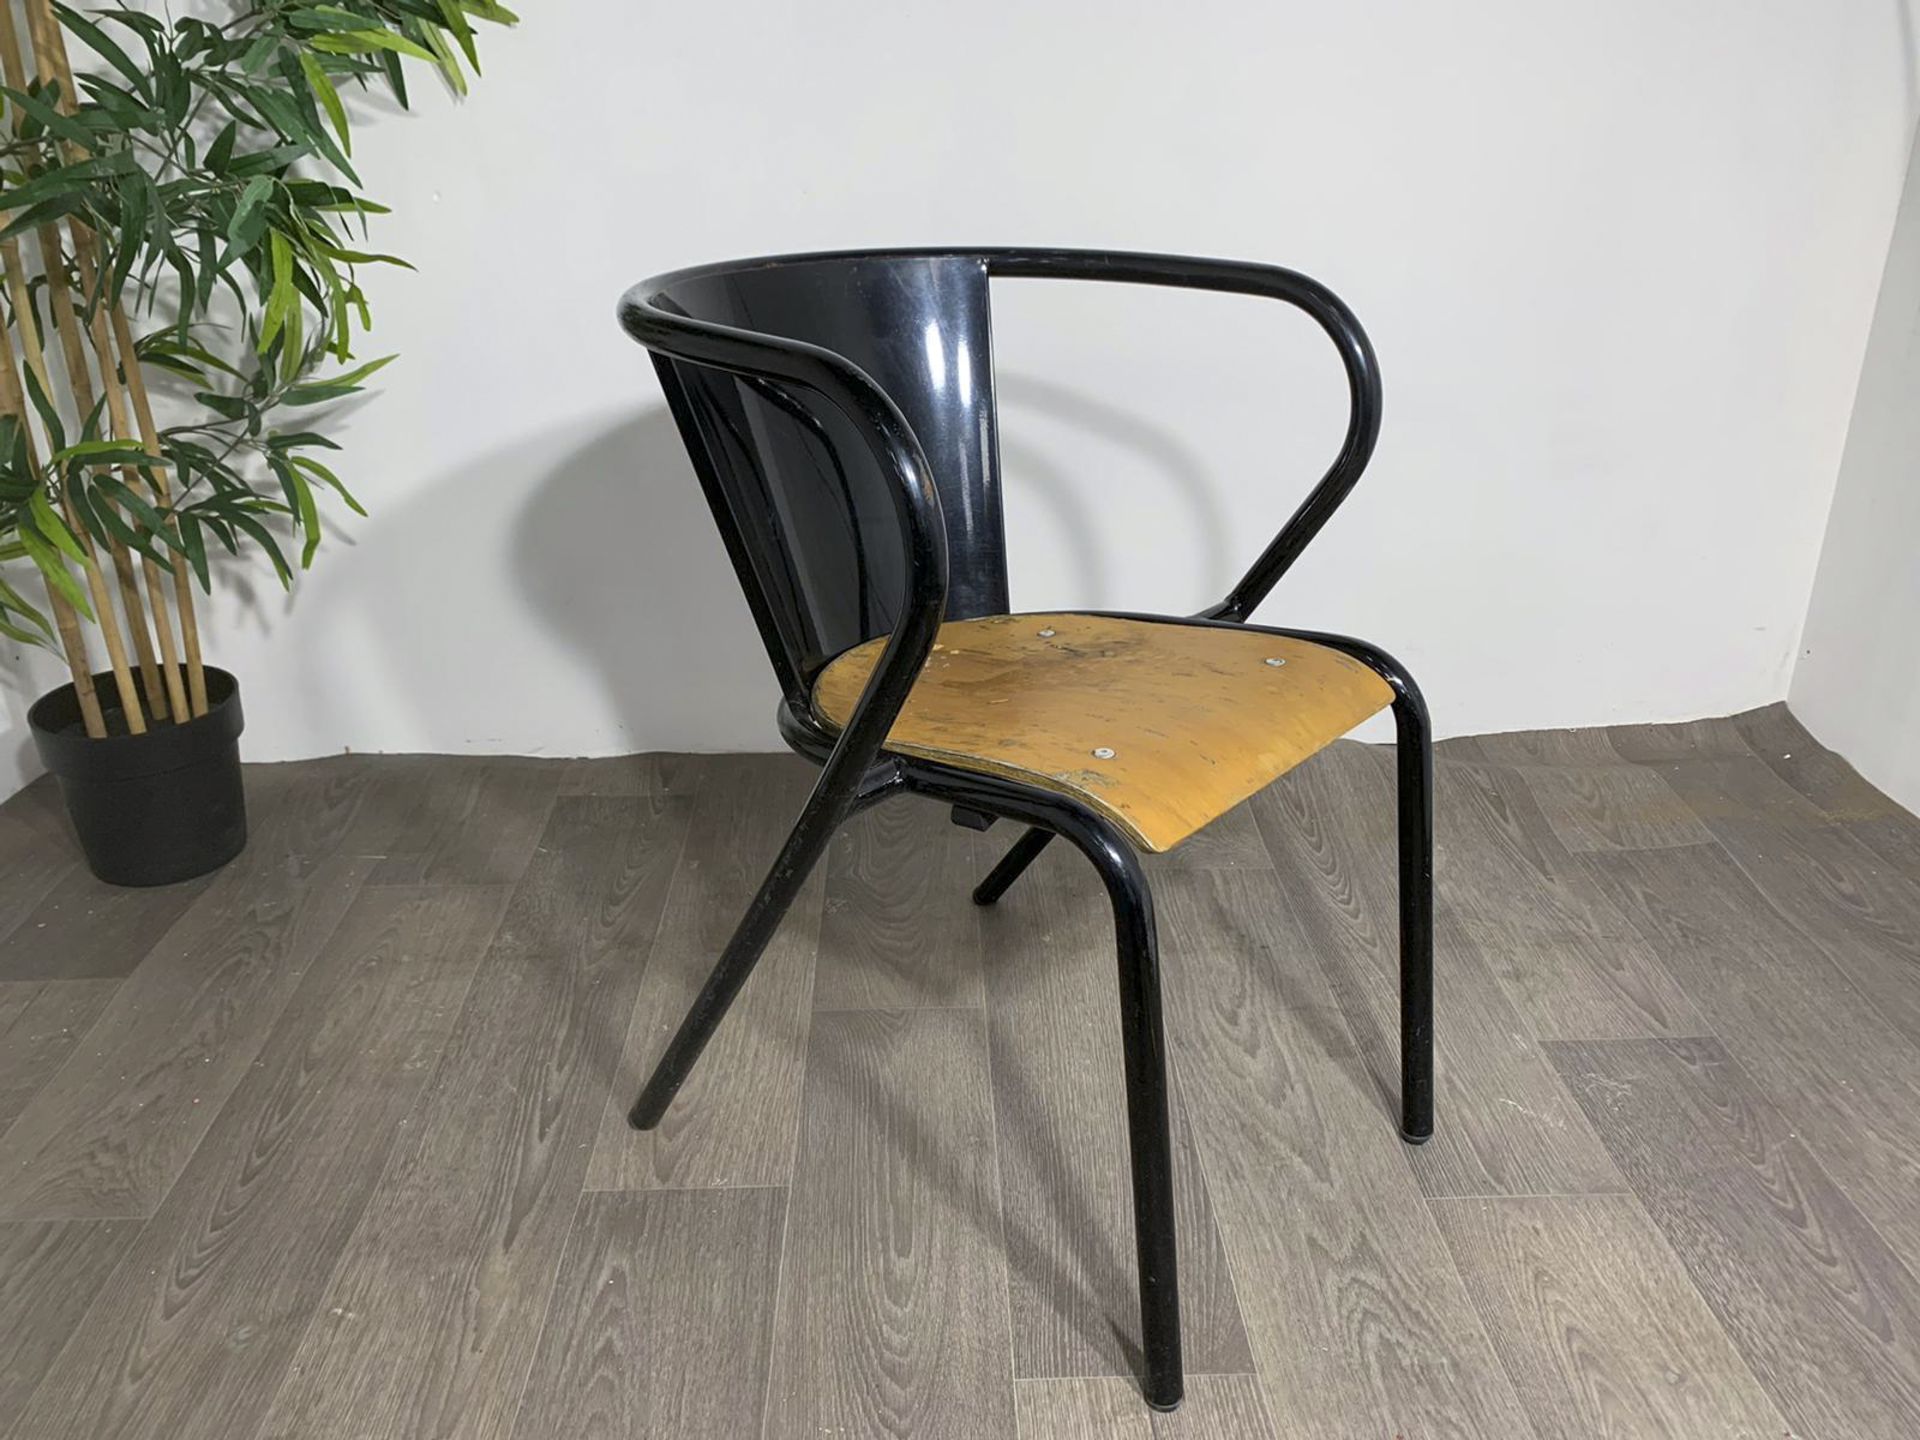 Adico 5008 Black Chair With Wooden Seat - Image 5 of 8